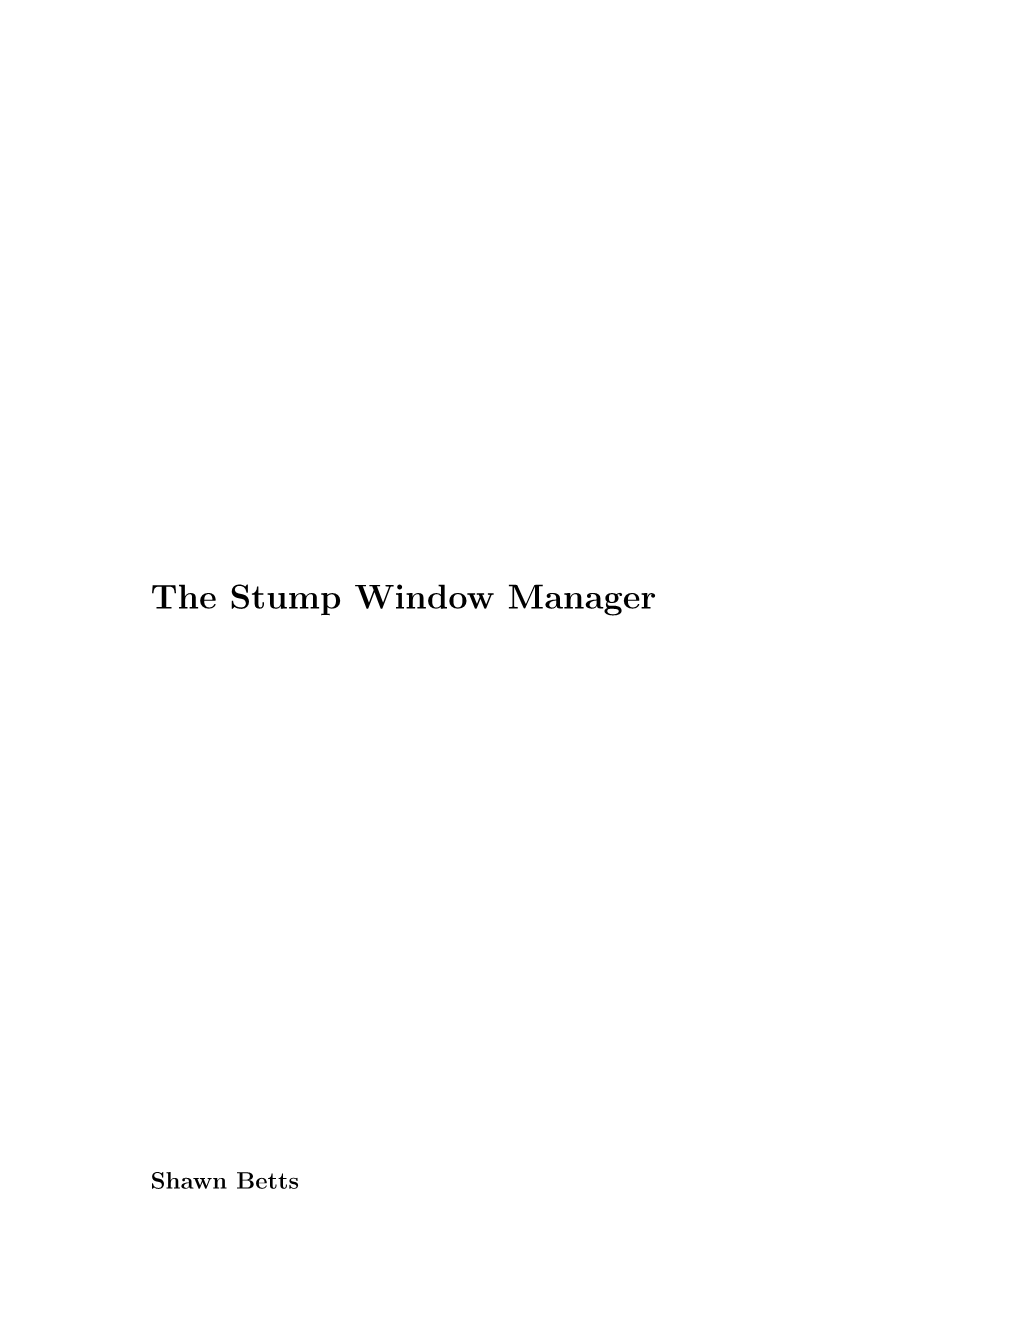 The Stump Window Manager